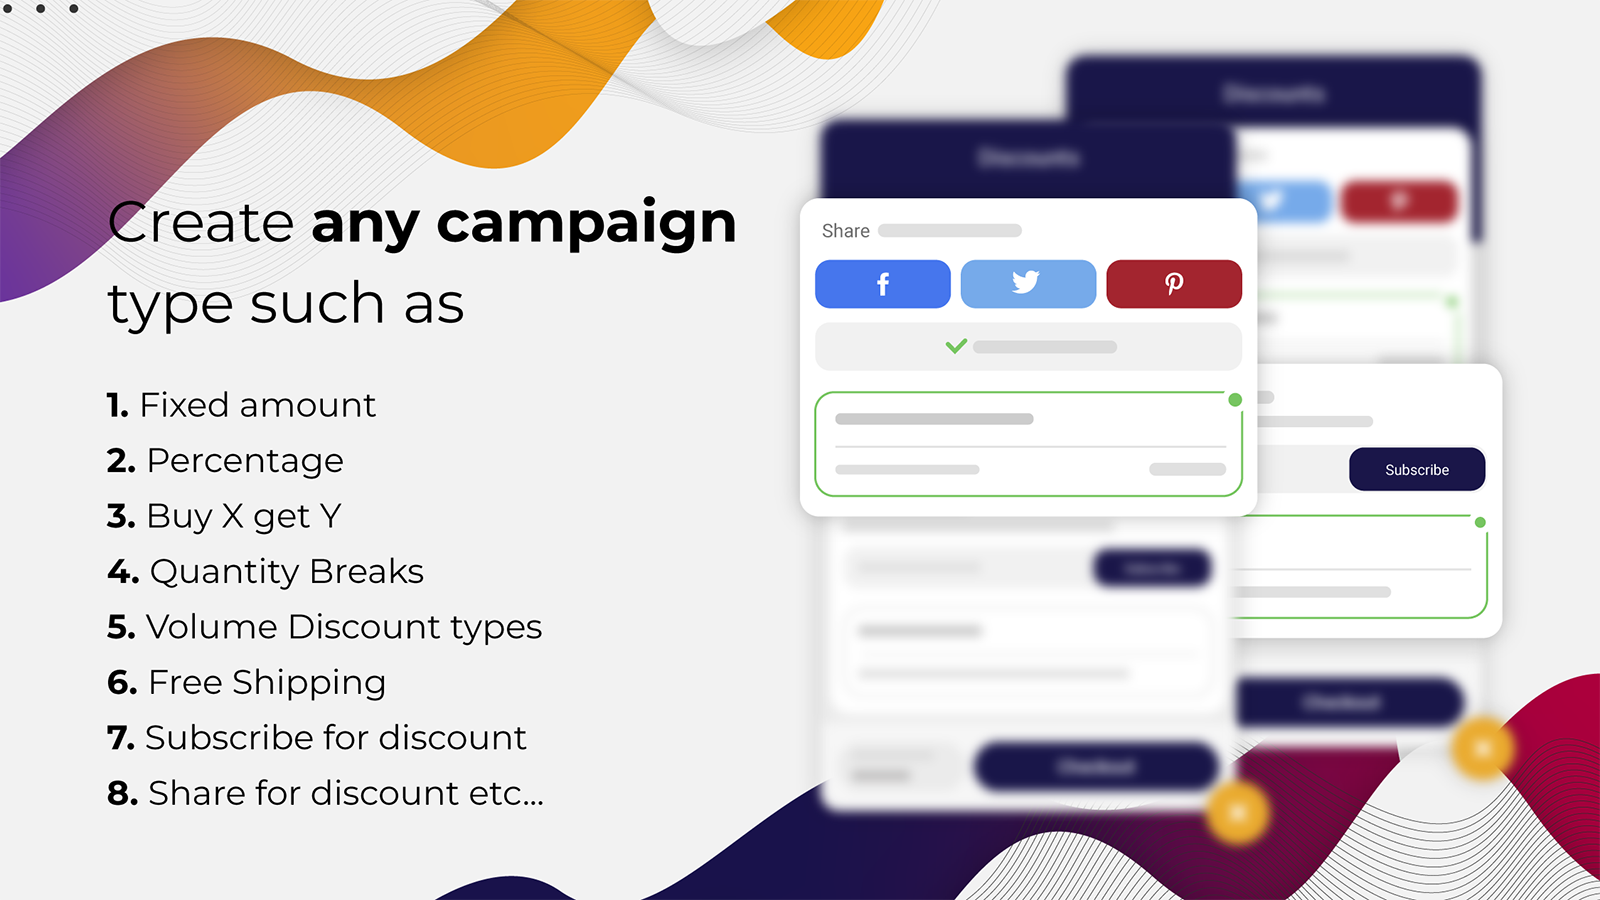 Create any campaign type